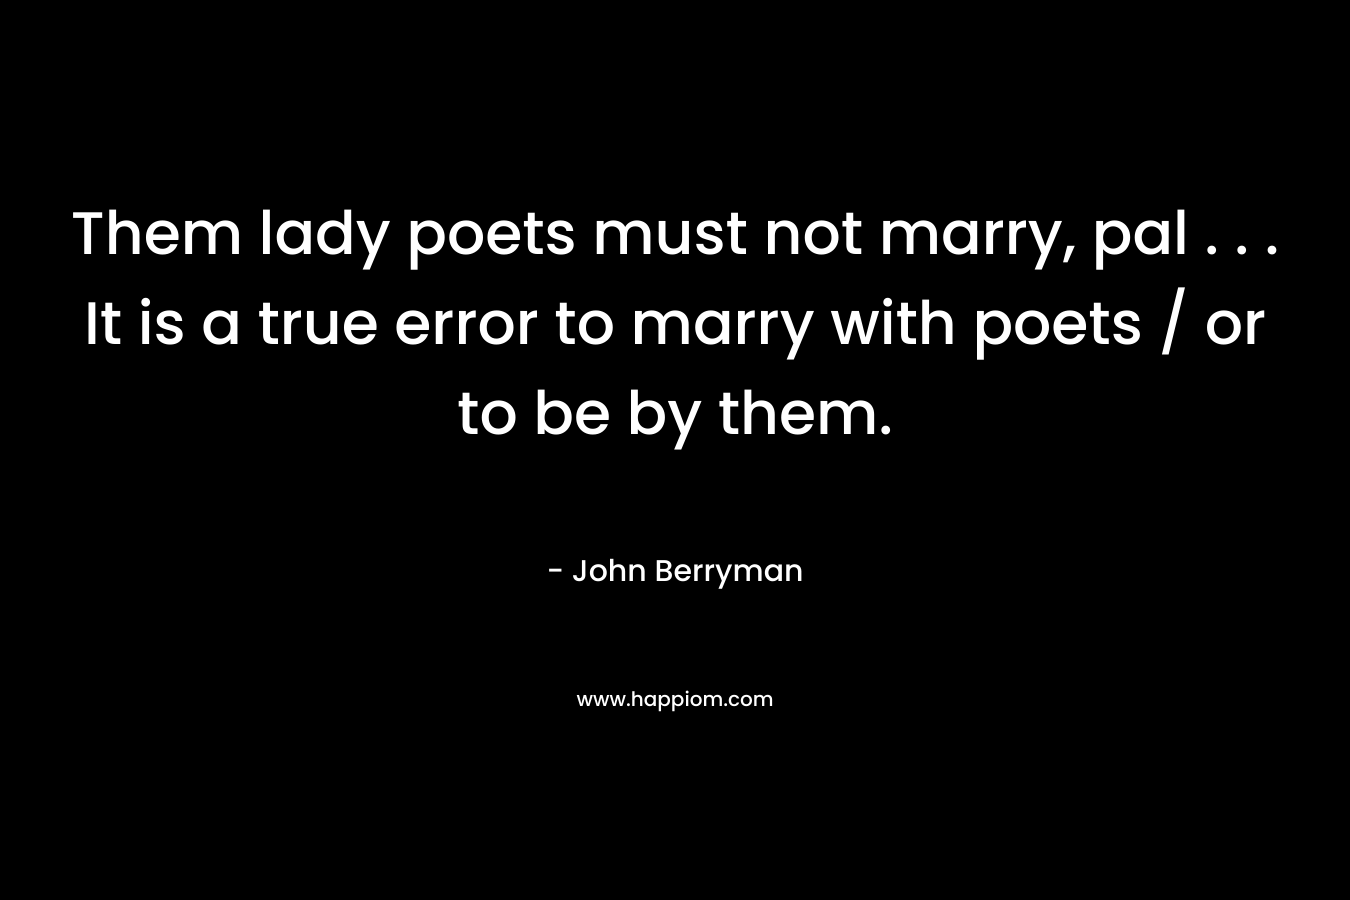 Them lady poets must not marry, pal . . . It is a true error to marry with poets / or to be by them. – John Berryman